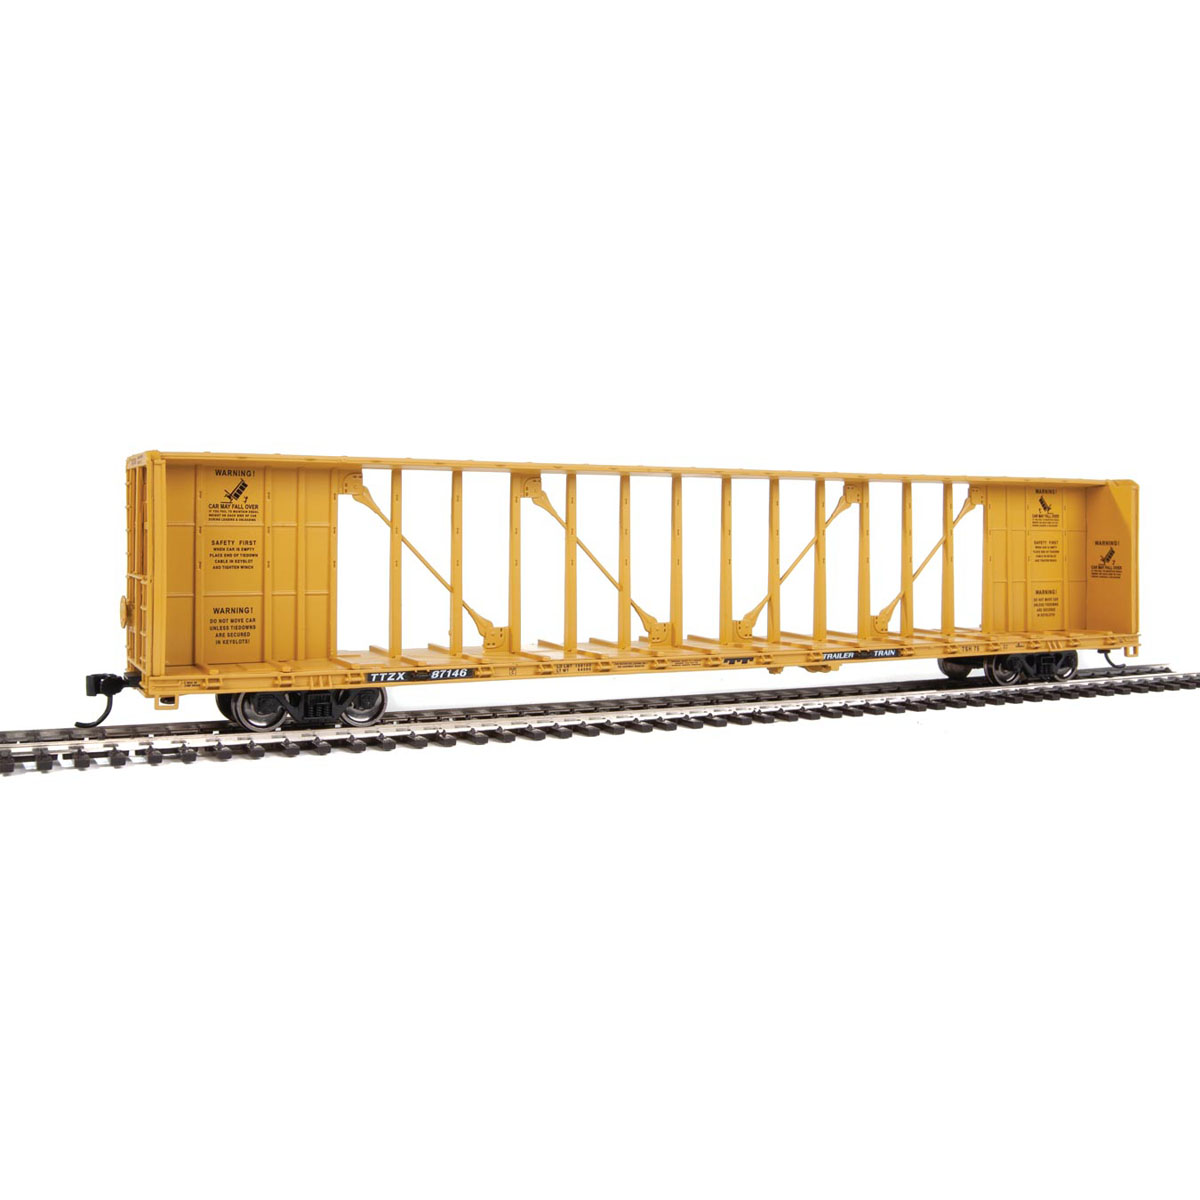 Walthers SceneMaster HO Scale Centerbeam Flatcar Lumber Load M.west 949-3157 for sale online 